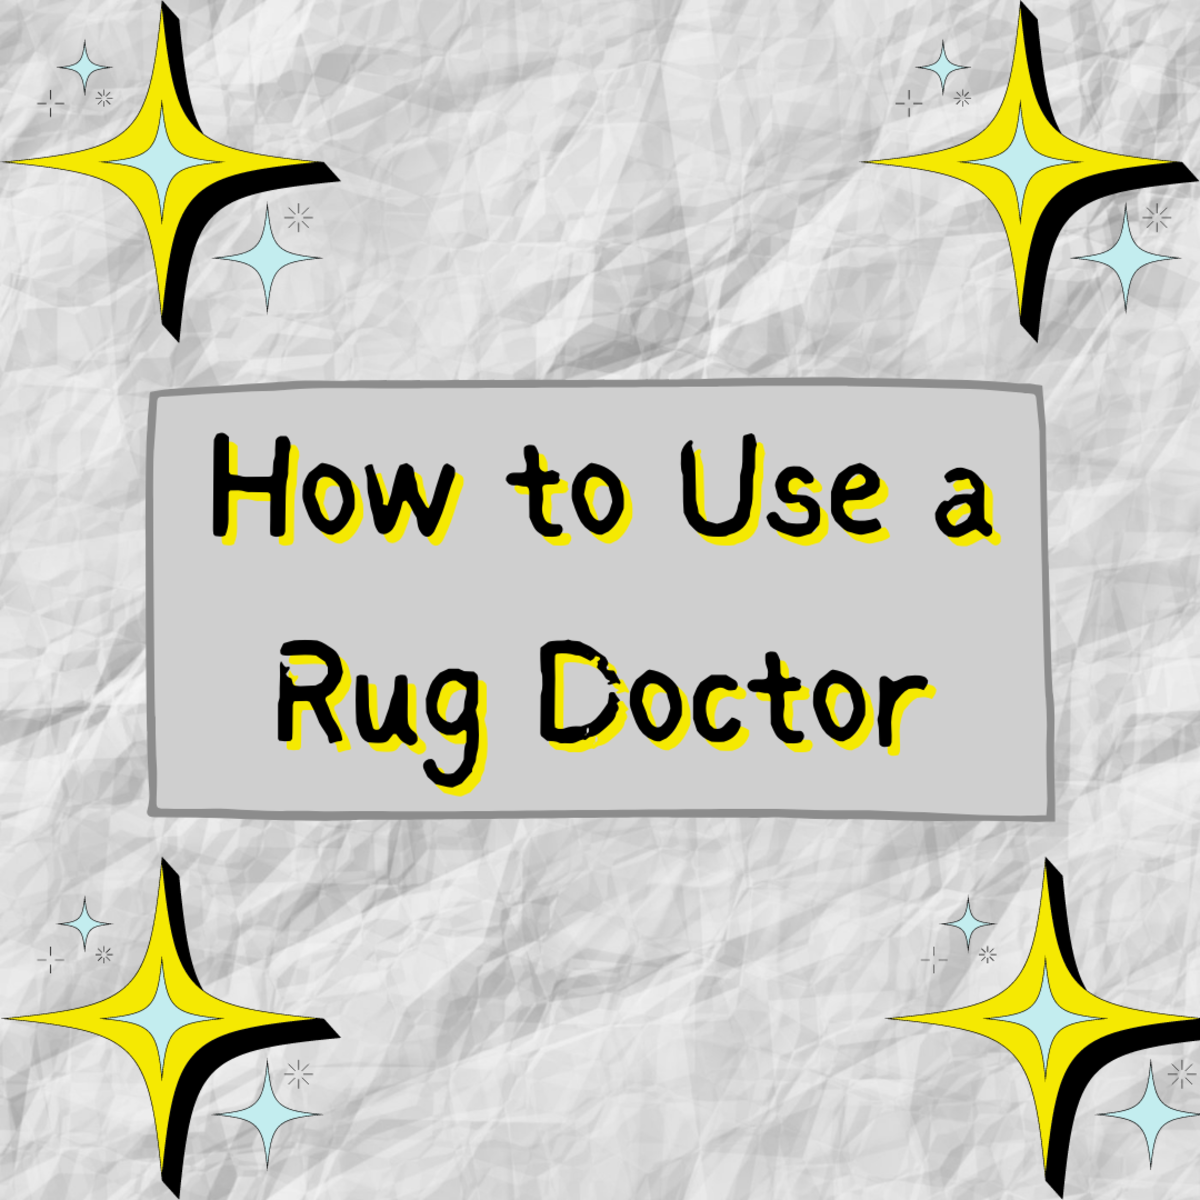 Read on to learn how to properly use a Rug Doctor steam cleamer!